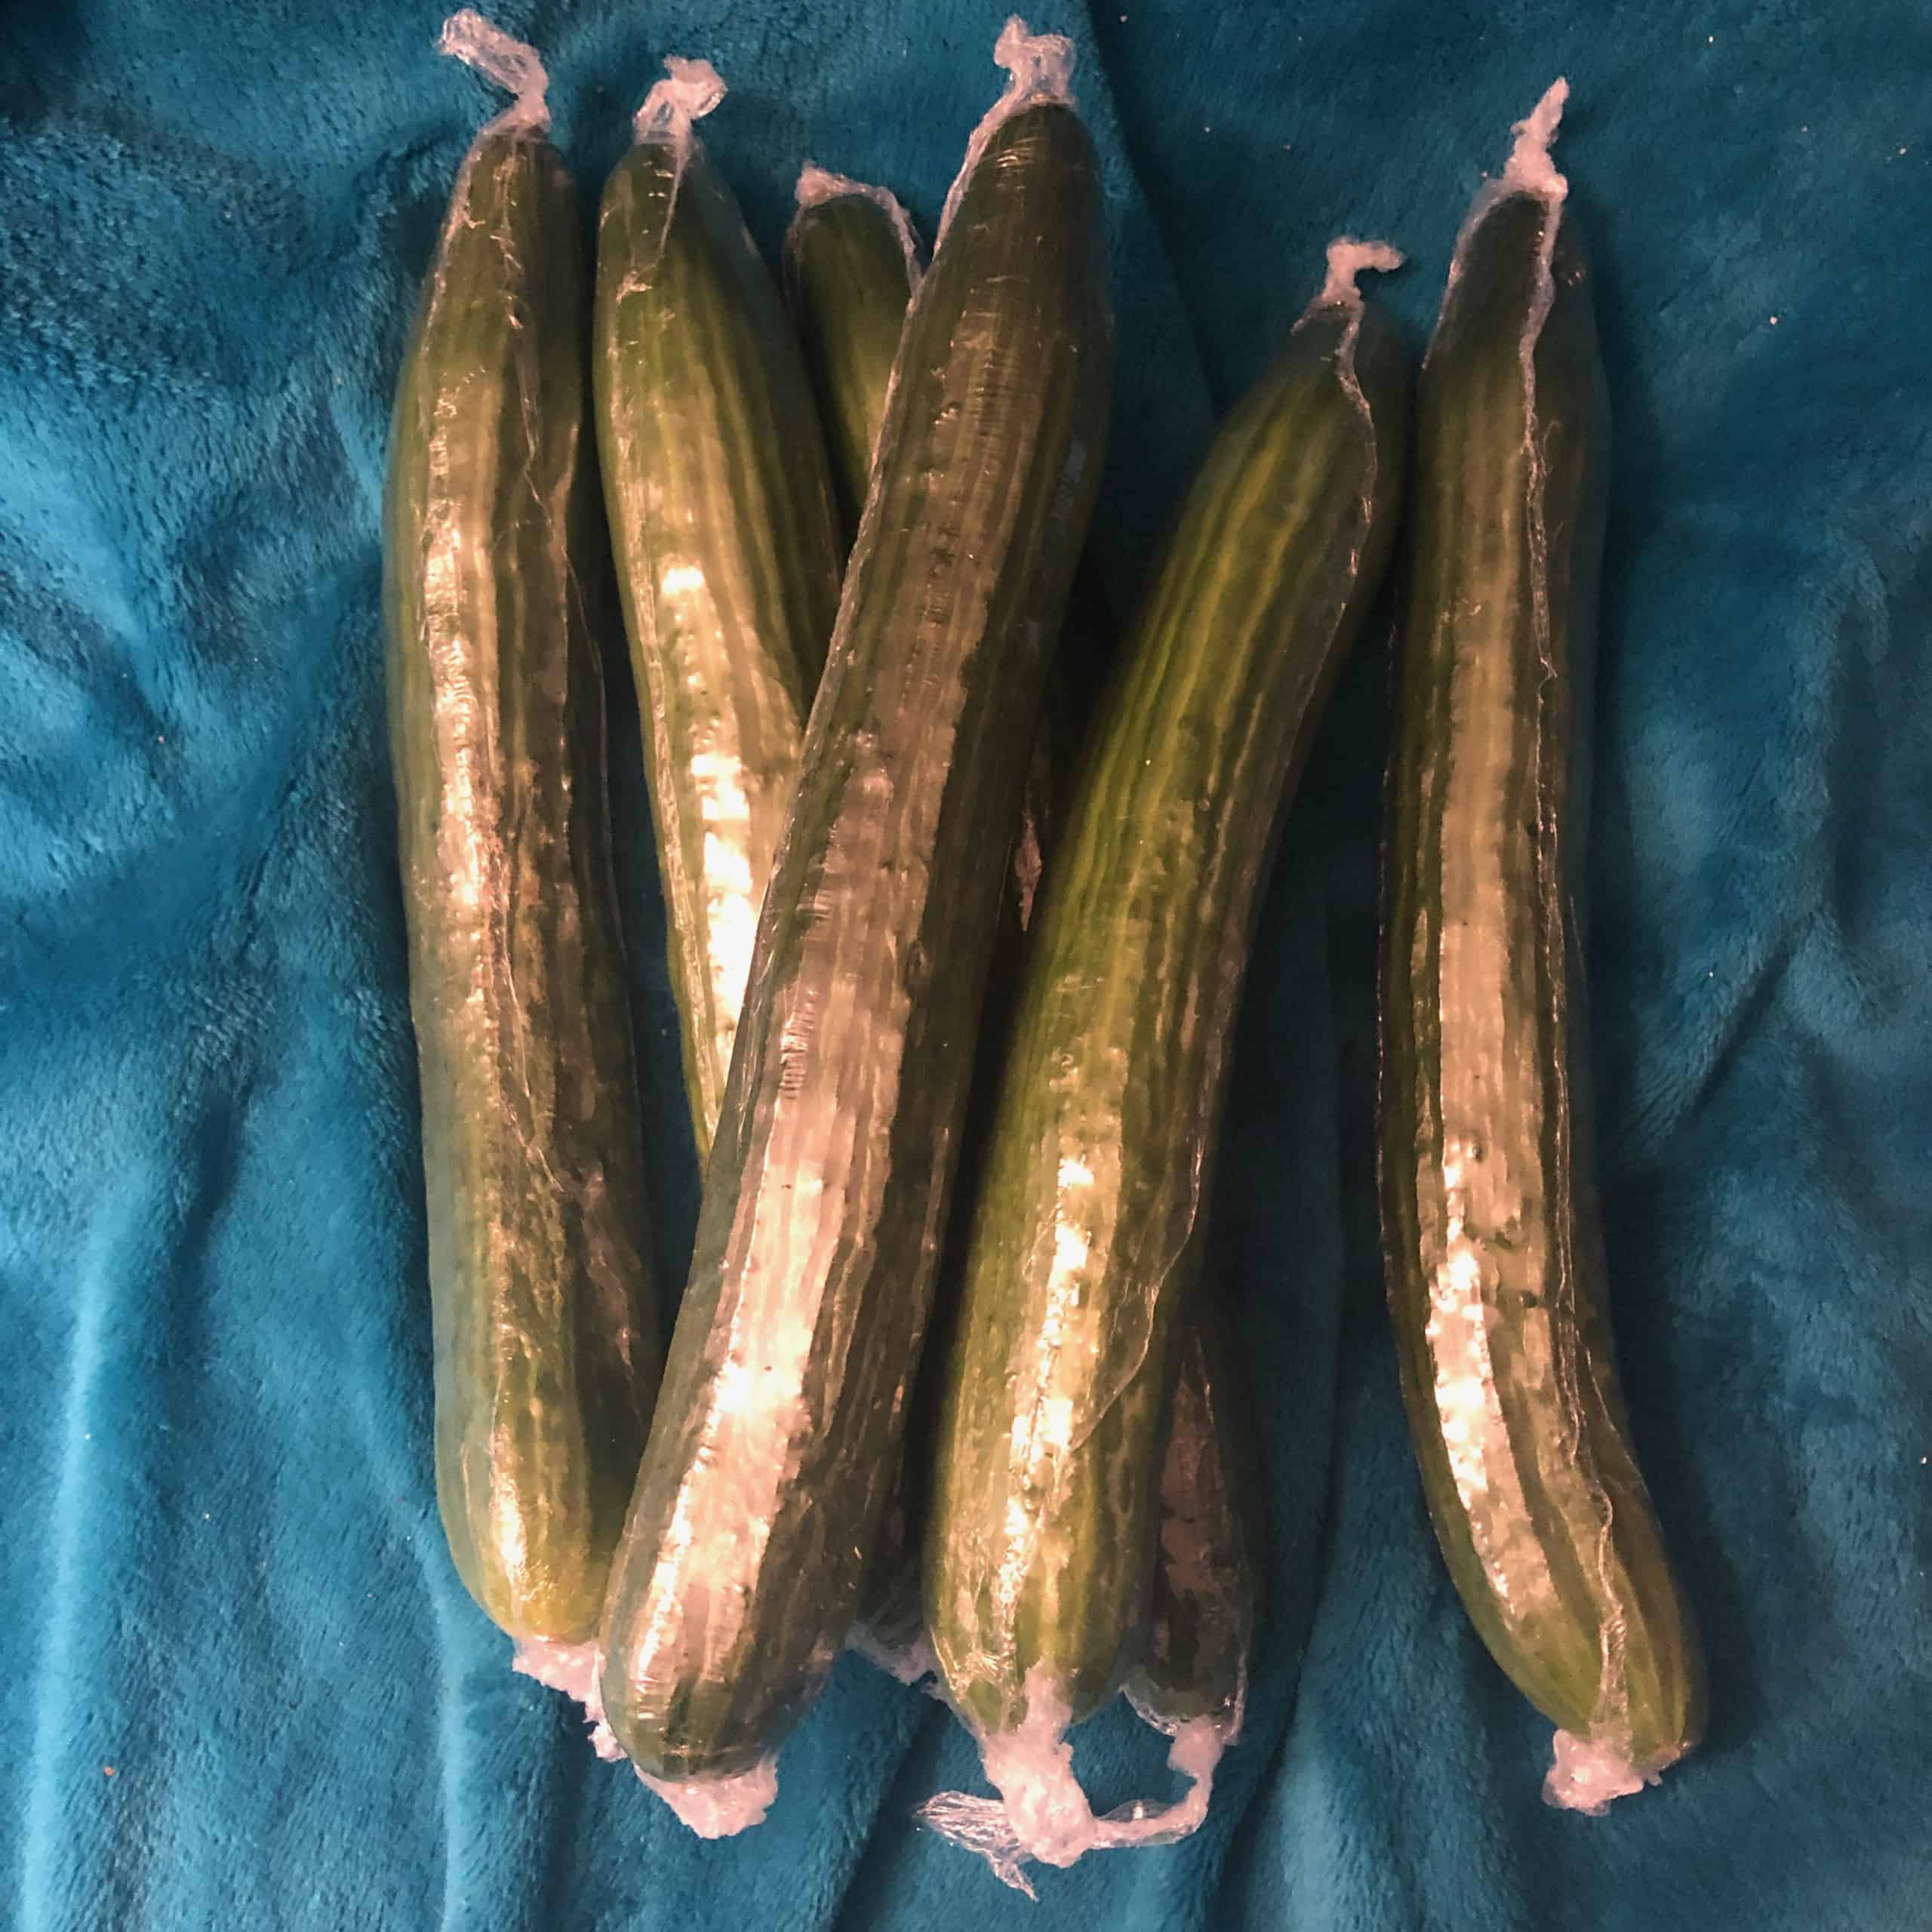 A pile of English cucumbers numbering six